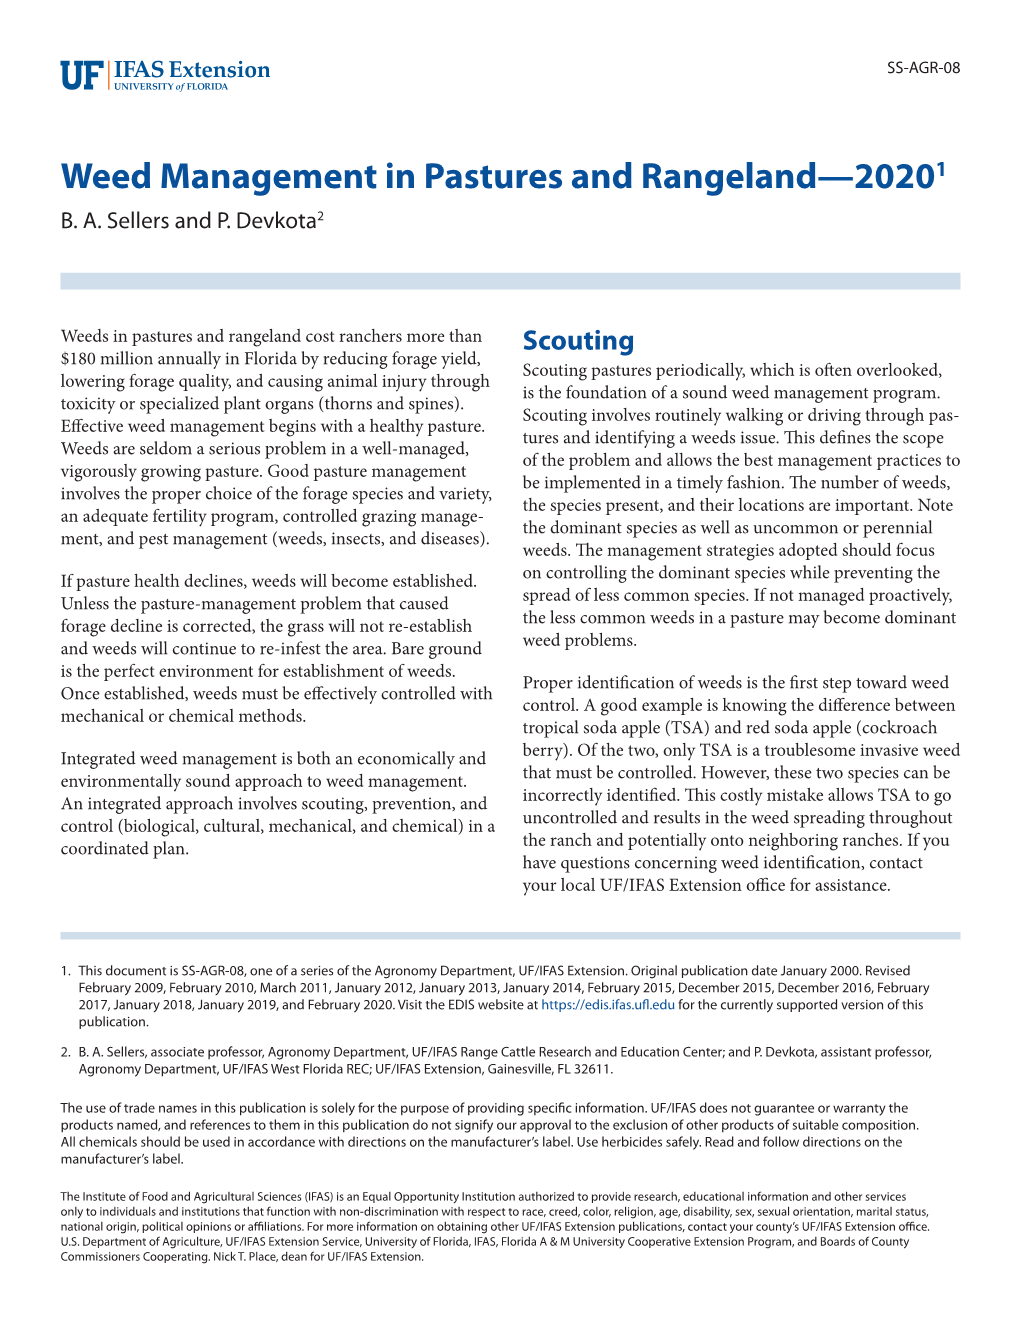 Weed Management in Pastures and Rangeland—20201 B